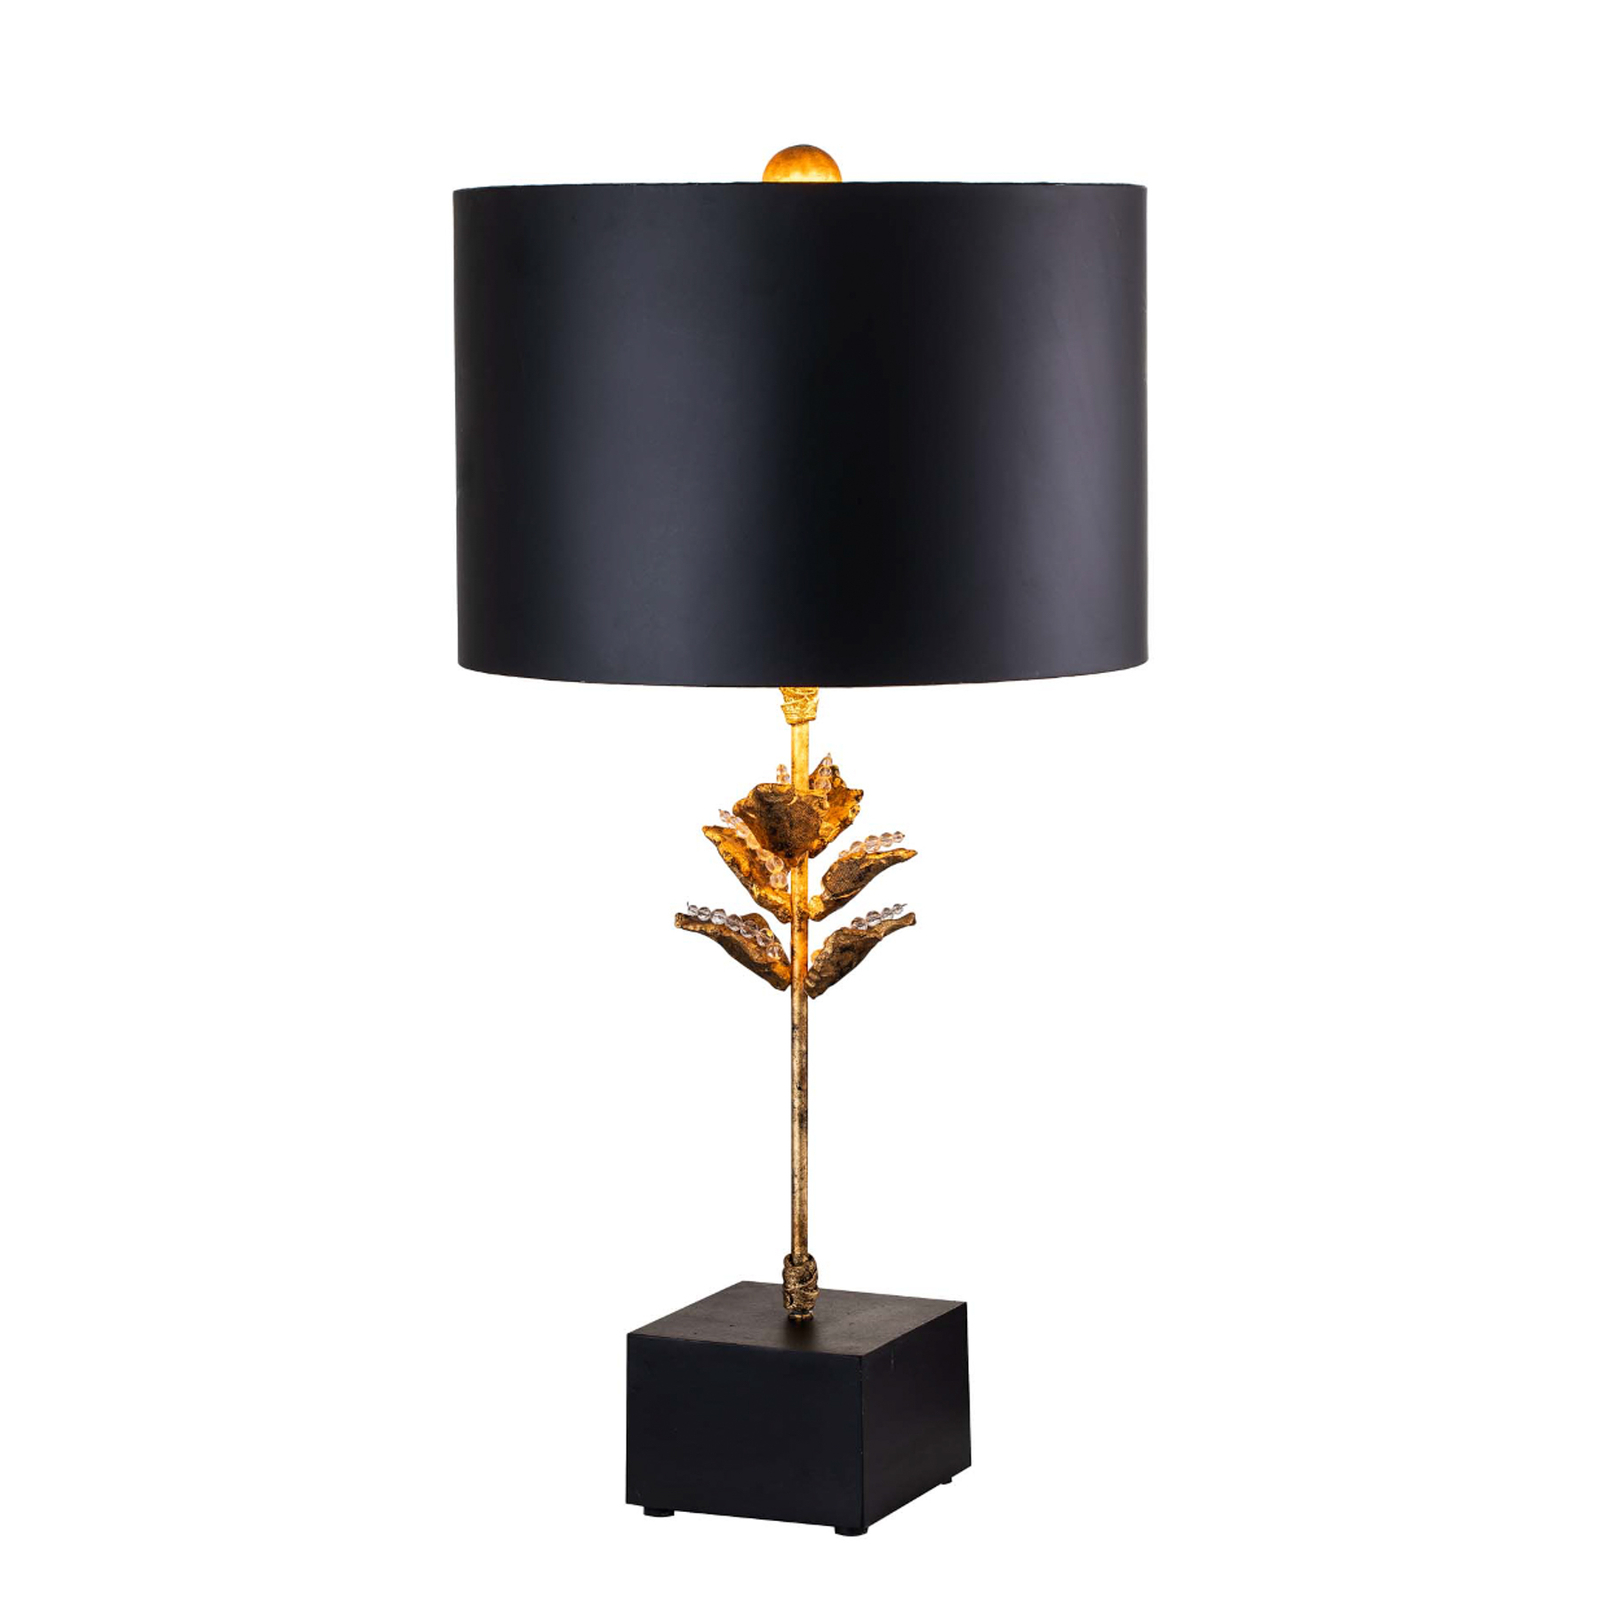 Camilia table lamp with parchment shade